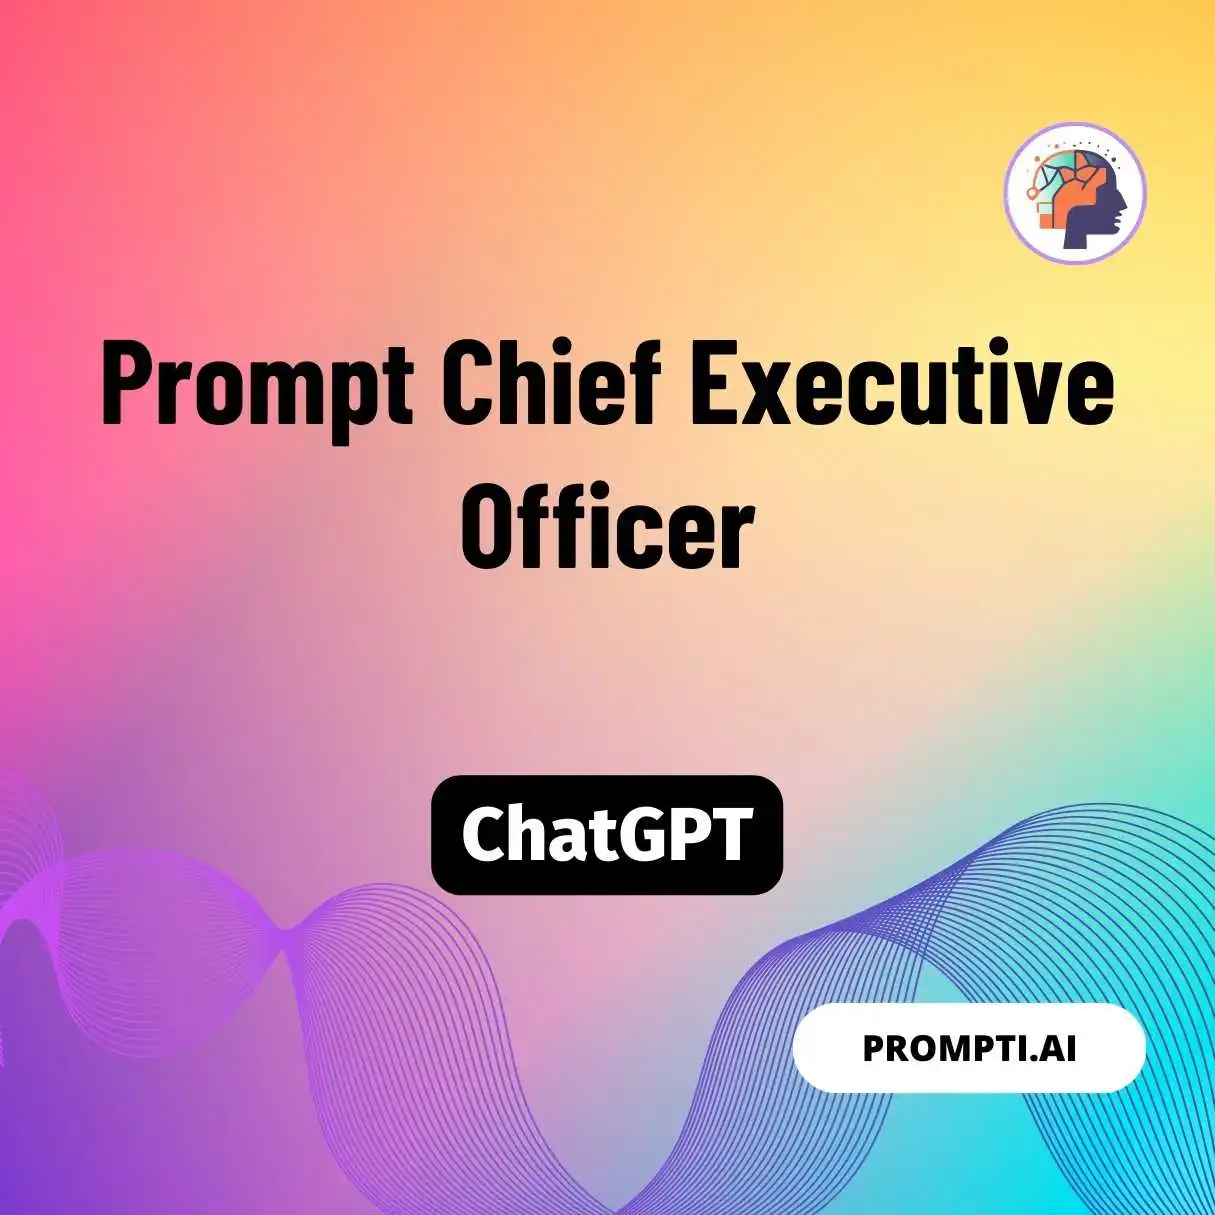 Prompt Chief Executive Officer